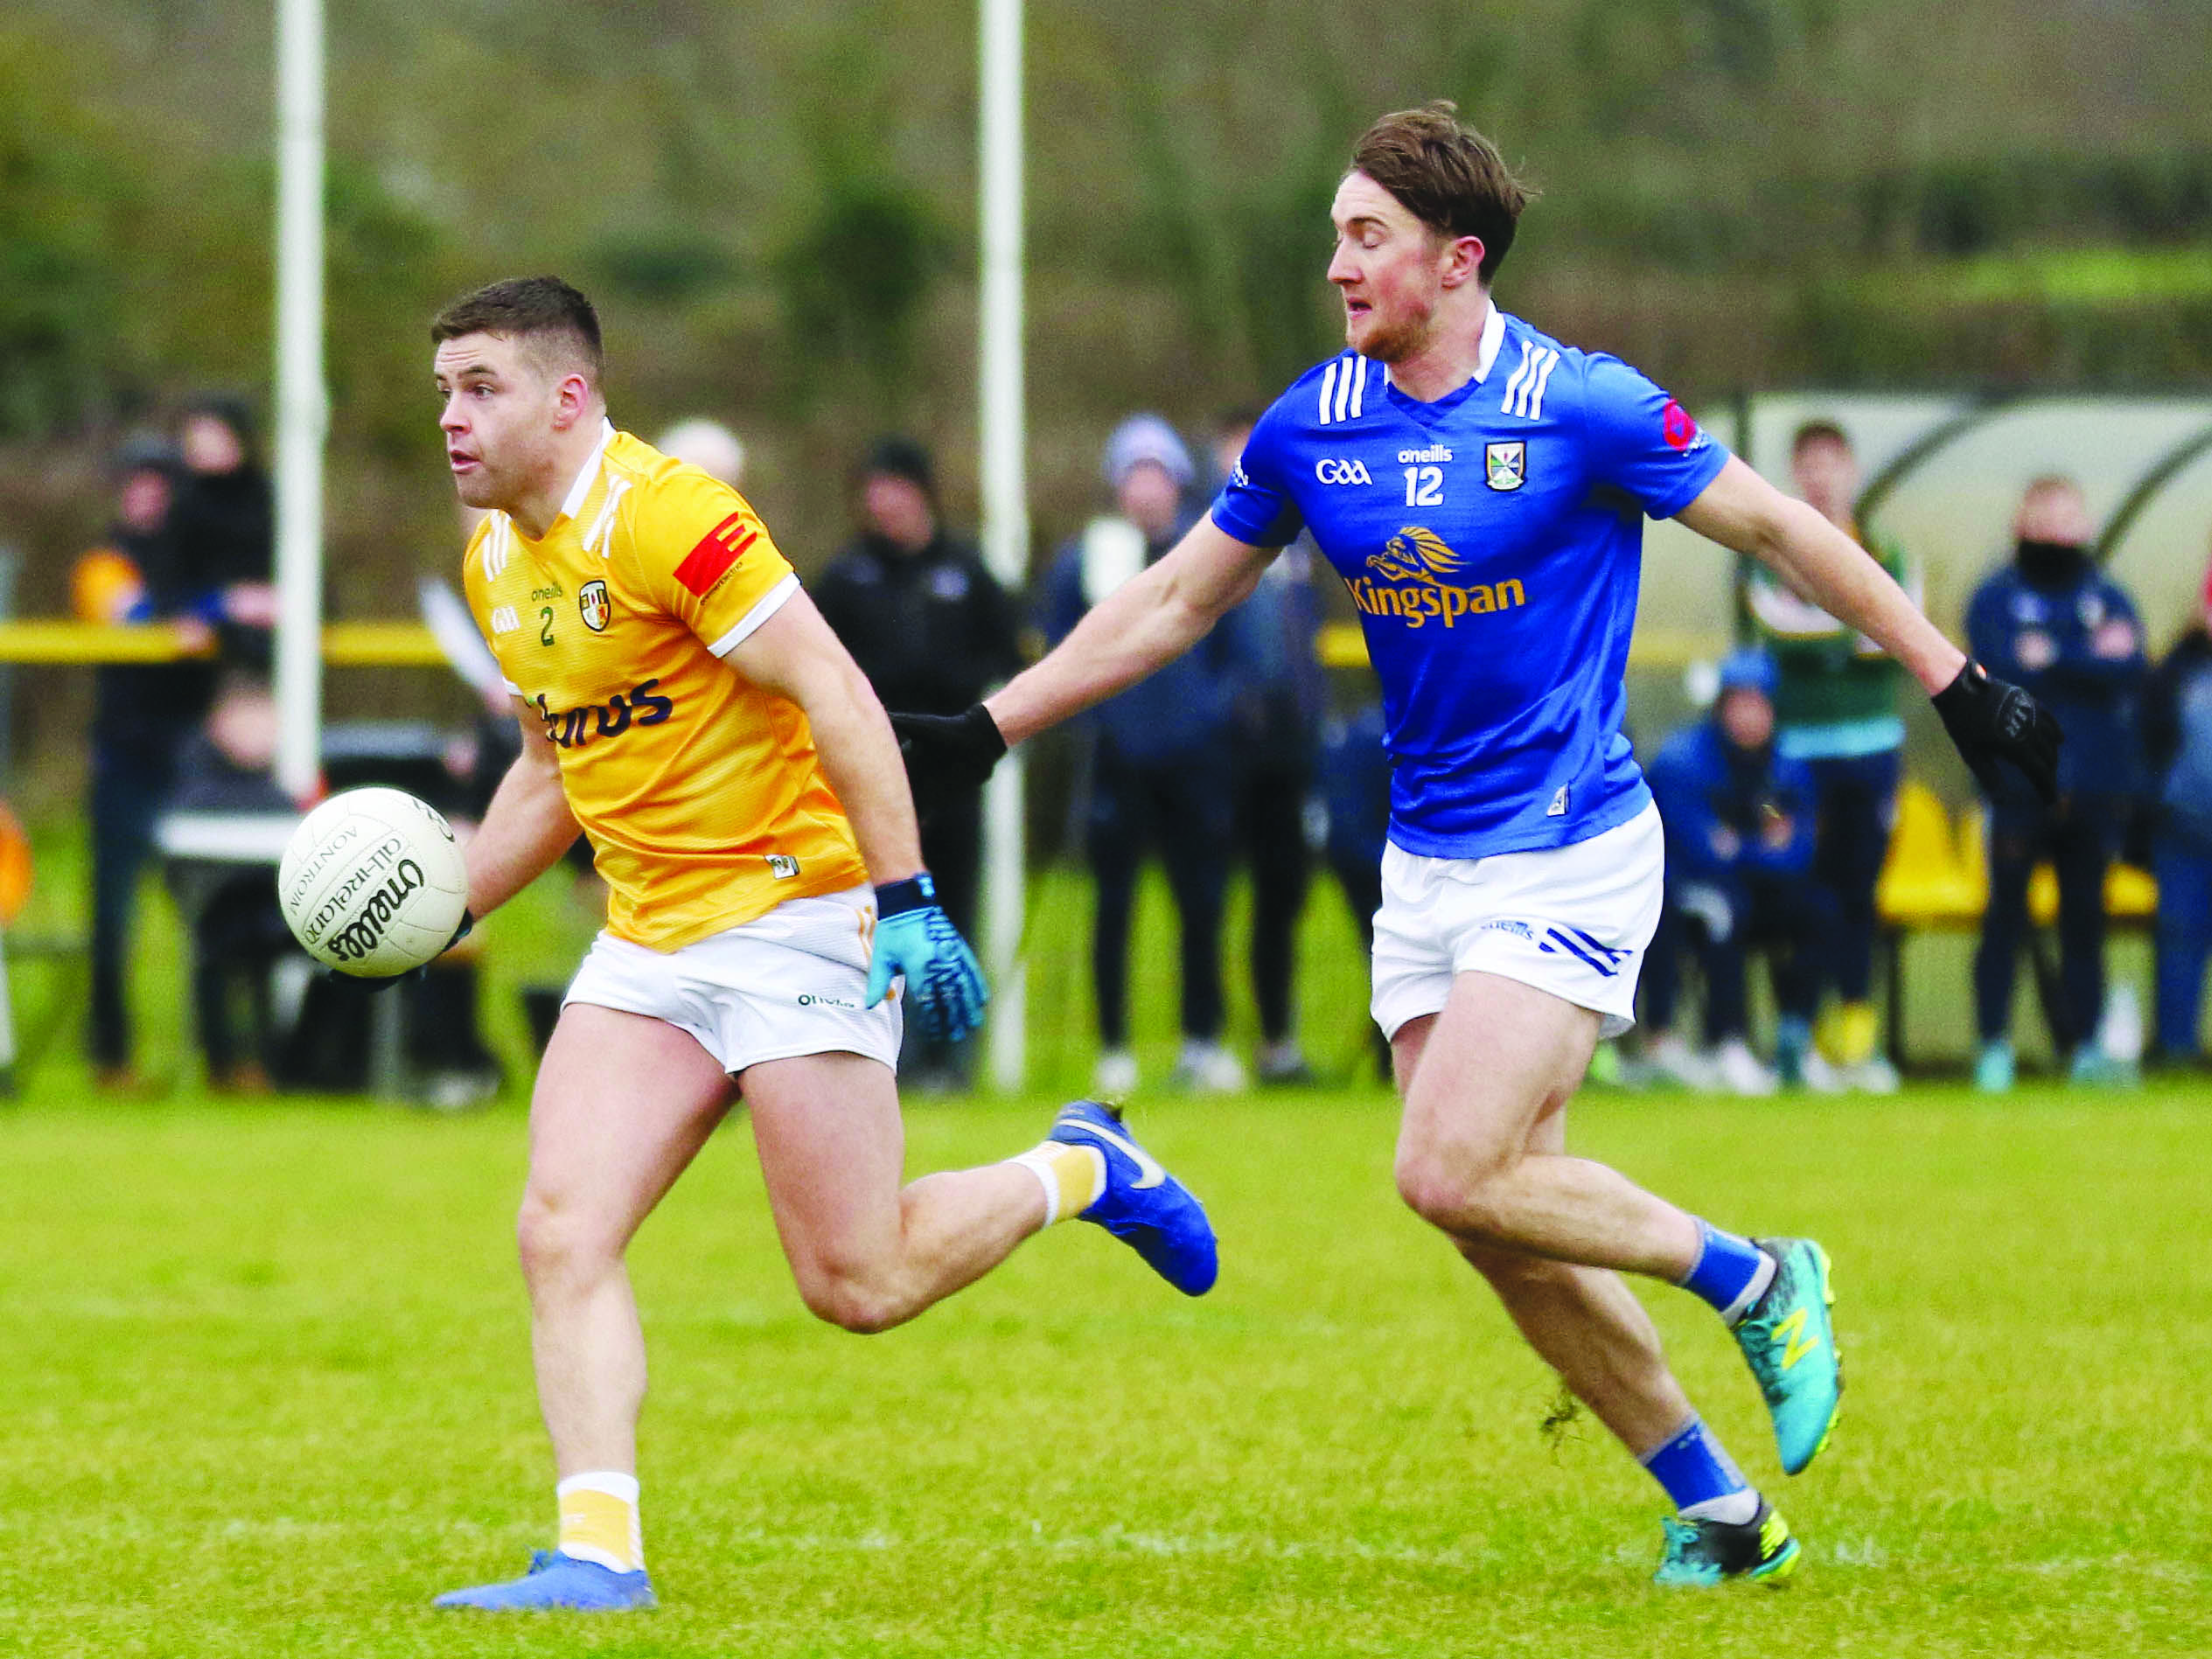 Patrick McBride was involved with Antrim in January but injury means he is out of action for Saturday’s crucial fixture against Tipperary at Semple Stadium, a game the St John’s man insists is the only thing occupying their minds at present